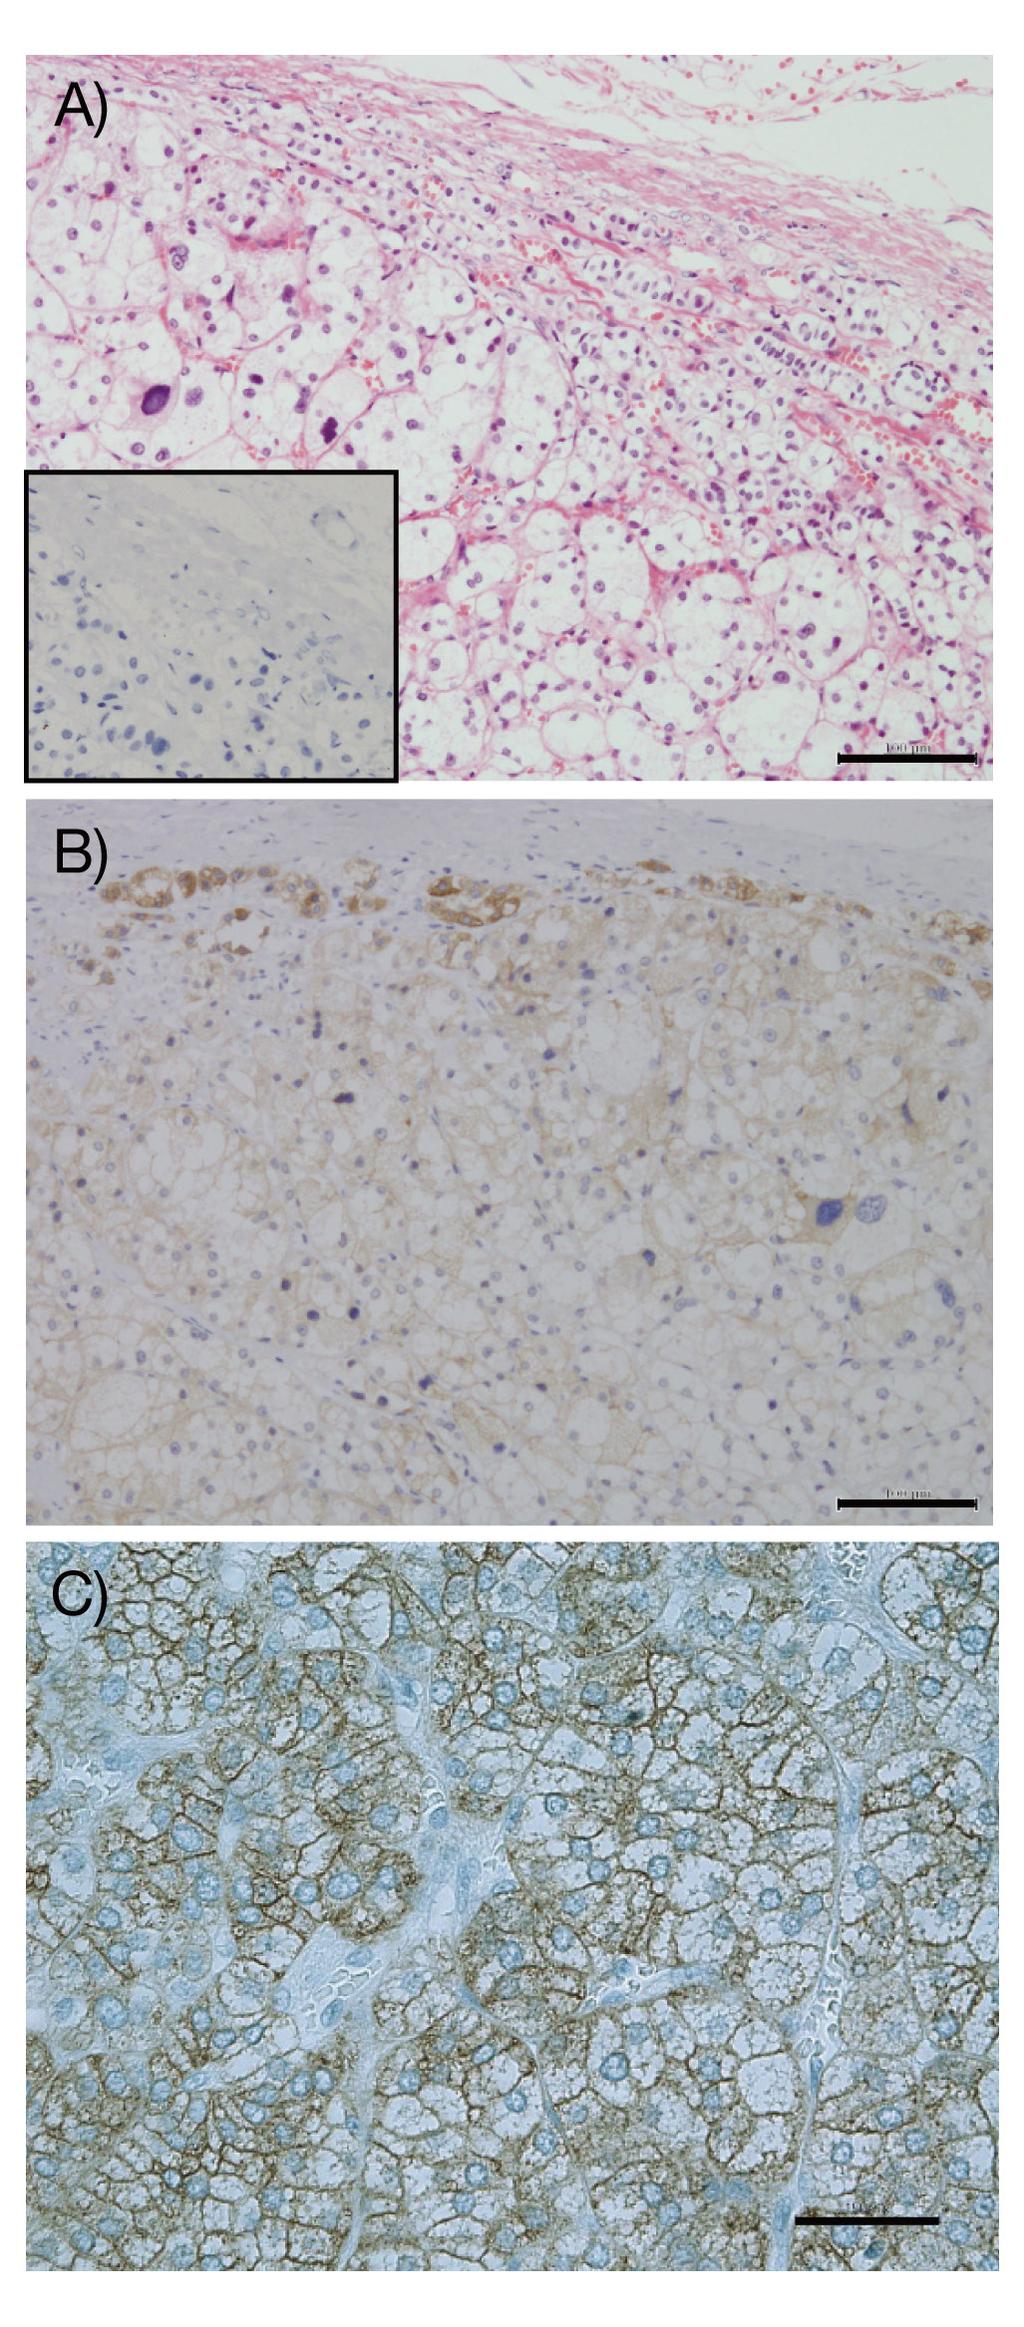 44 Okamura et al. Immunohistochemistry for KCNJ5 in APAs Fig. 3A and 3B show the results of staining with hematoxylin-eosin and an antibody against KCNJ5 in a normal adrenal gland adjusted to an APA.